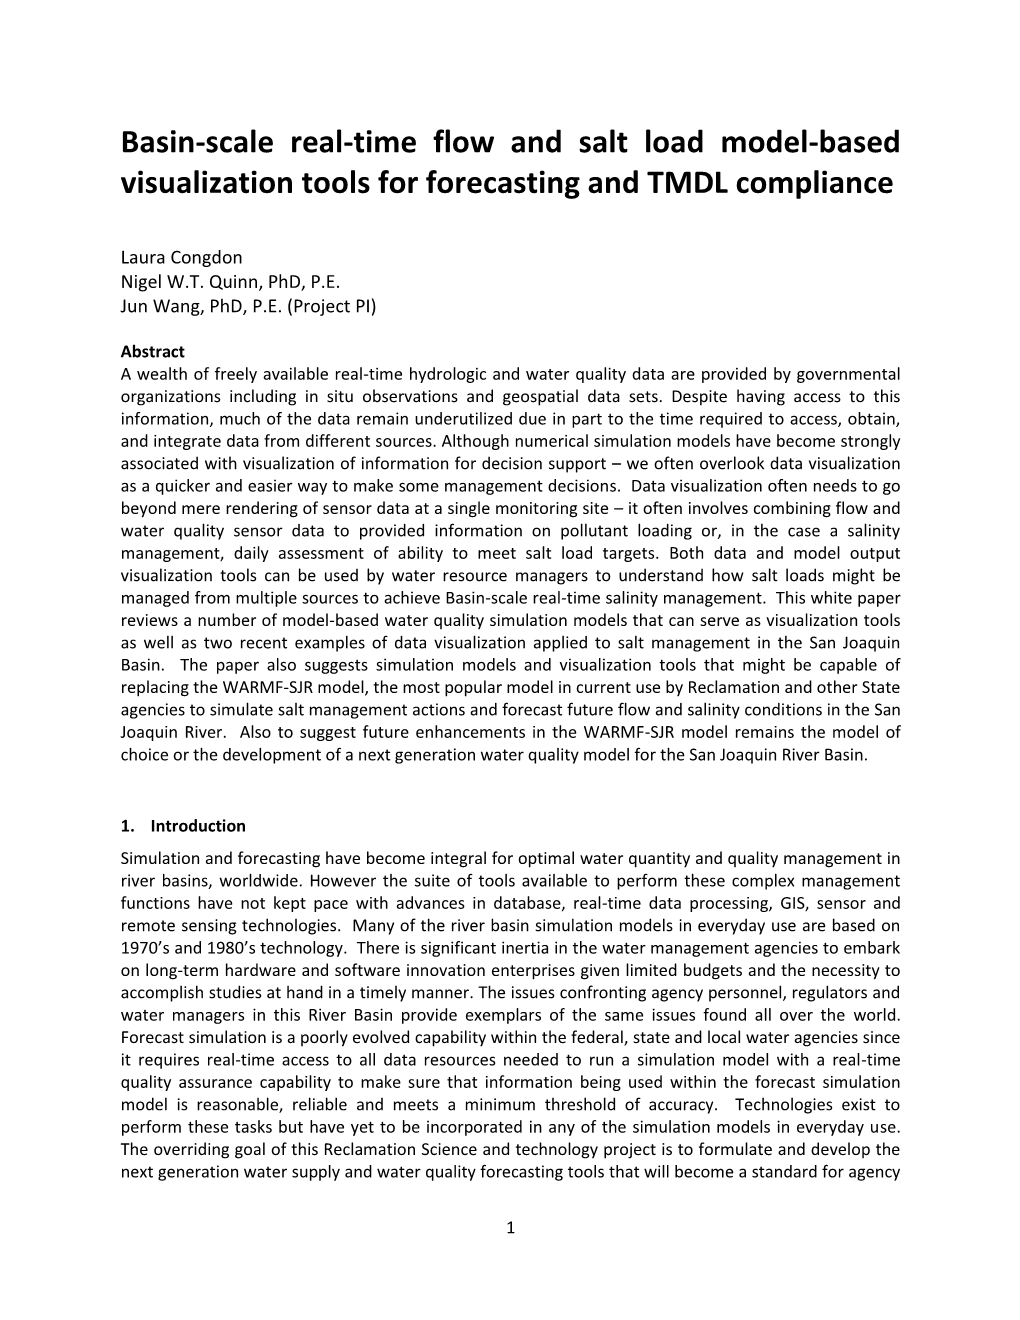 Basin-Scale Real-Time Flow and Salt Load Model-Based Visualization Tools for Forecasting and TMDL Compliance